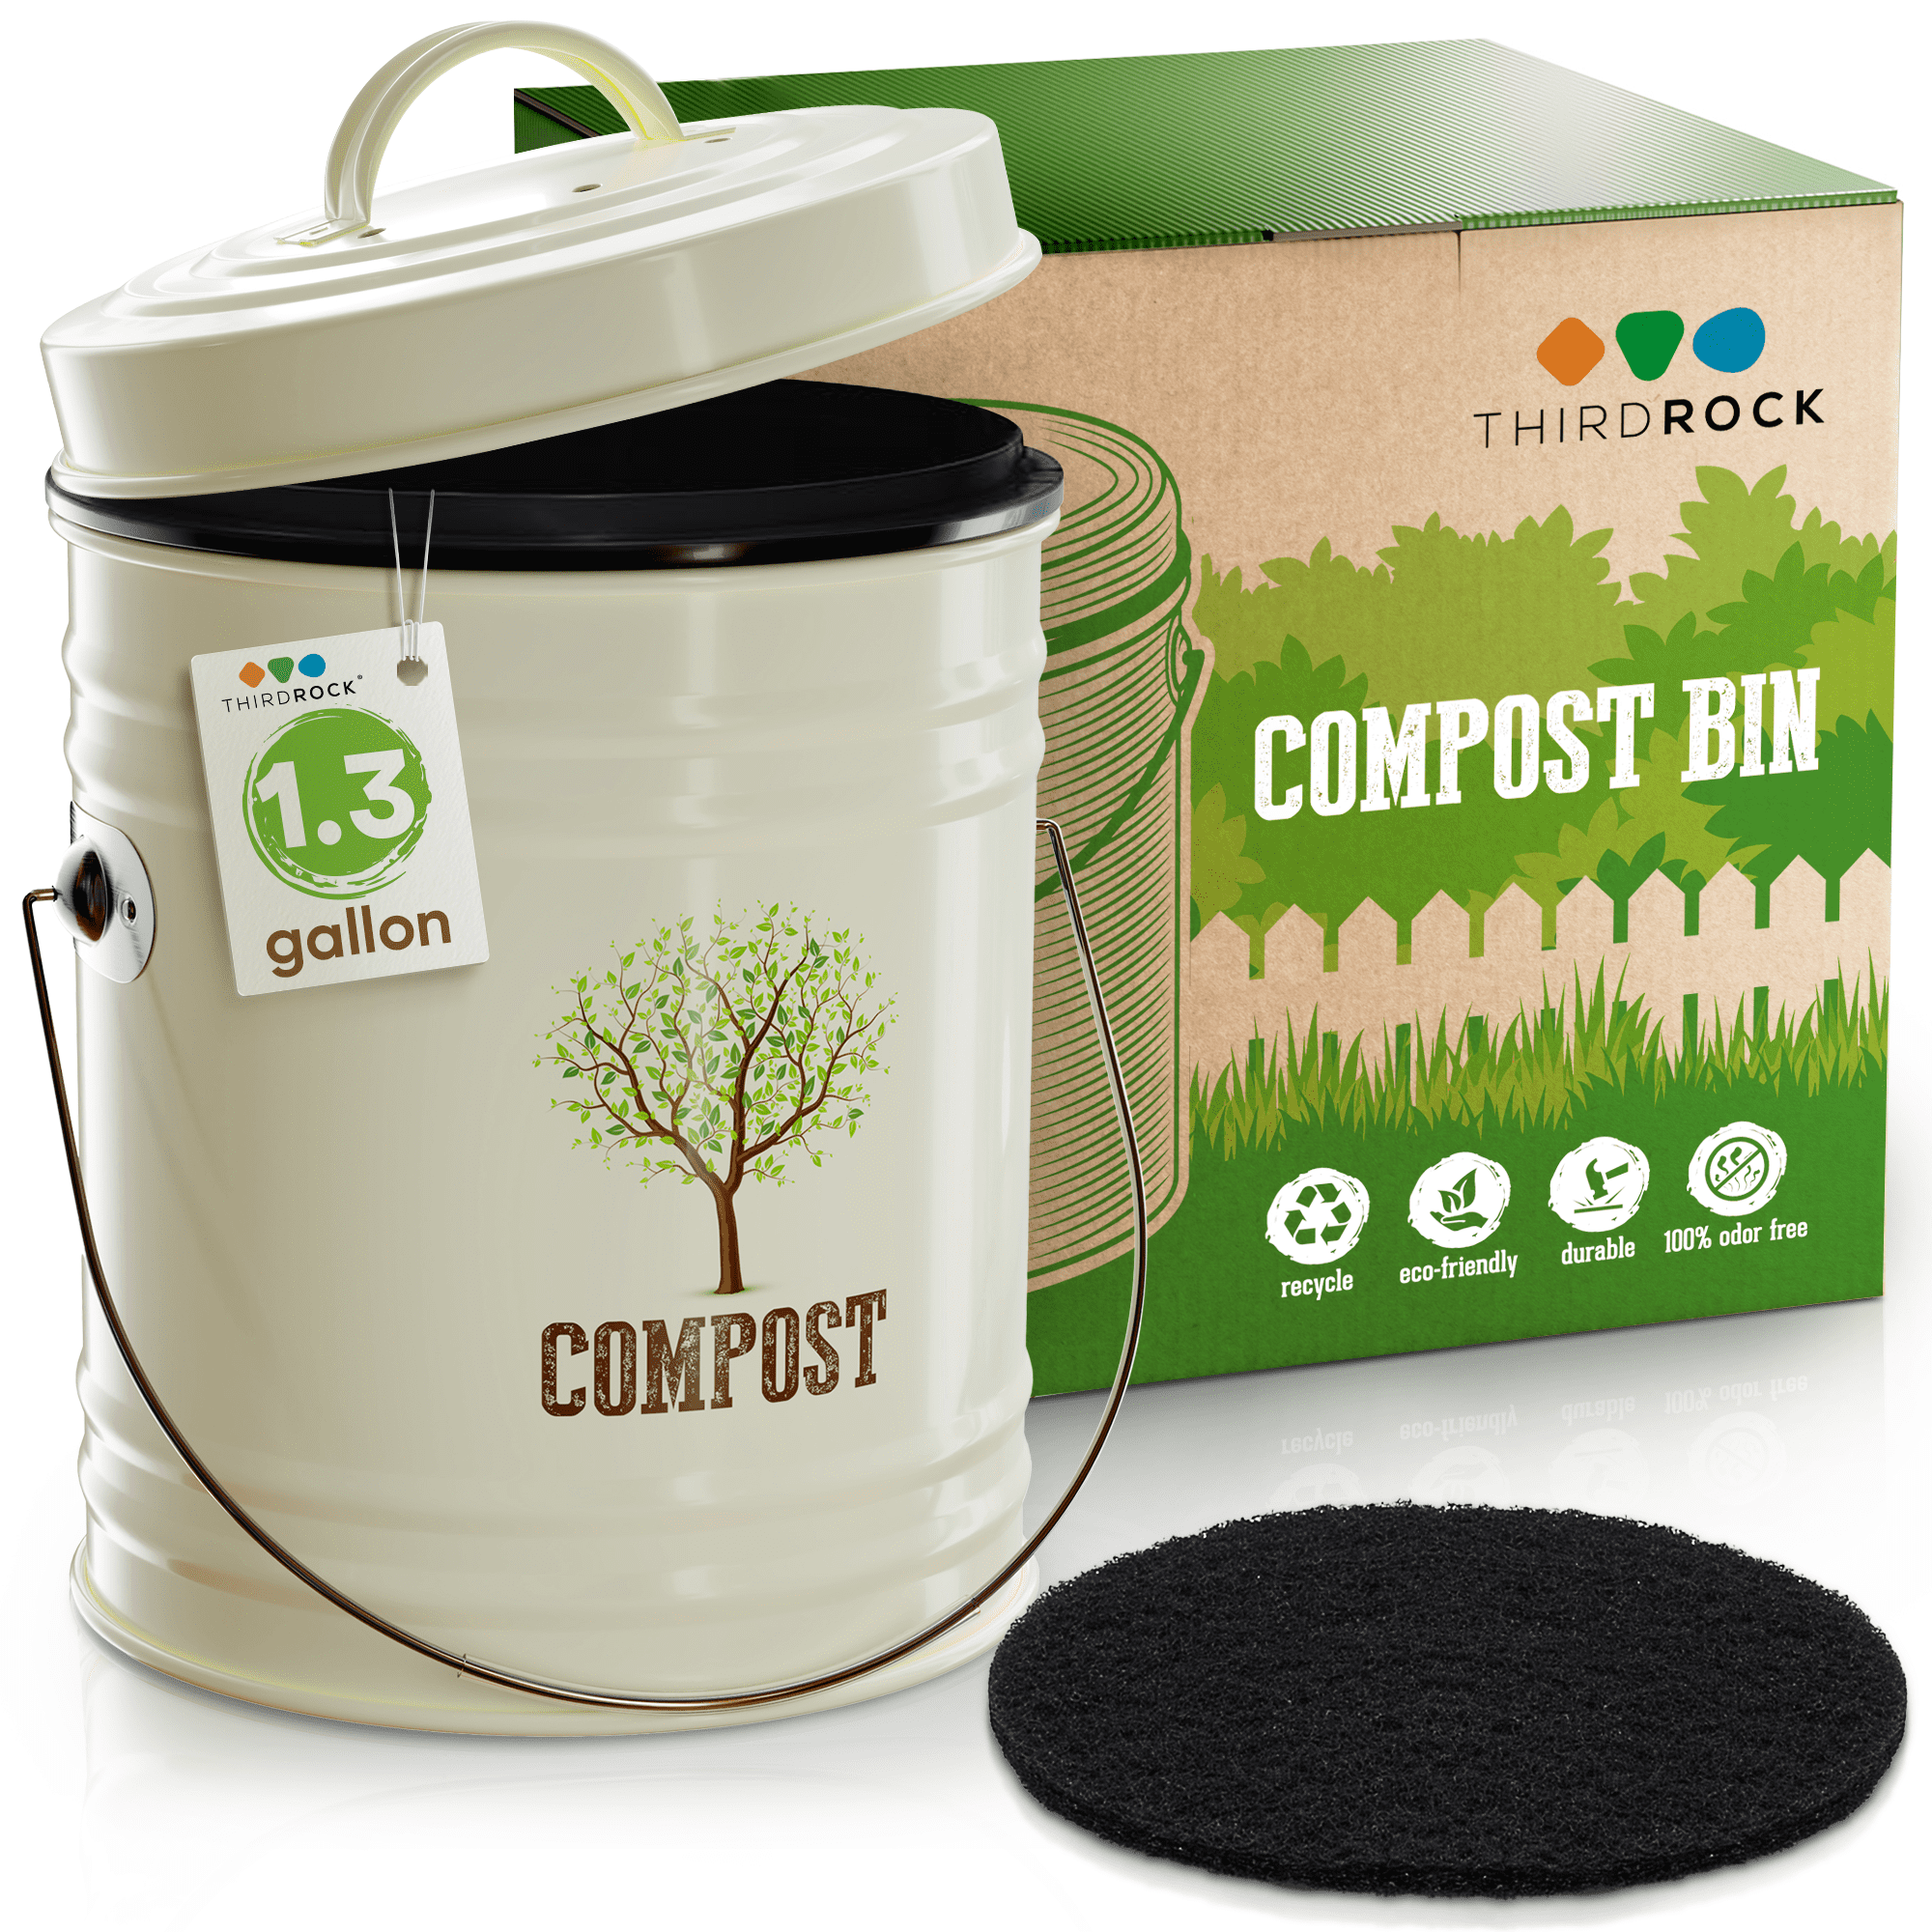 set of two filters activated carbon Filters for Exaco ECO 2000 compost pail 